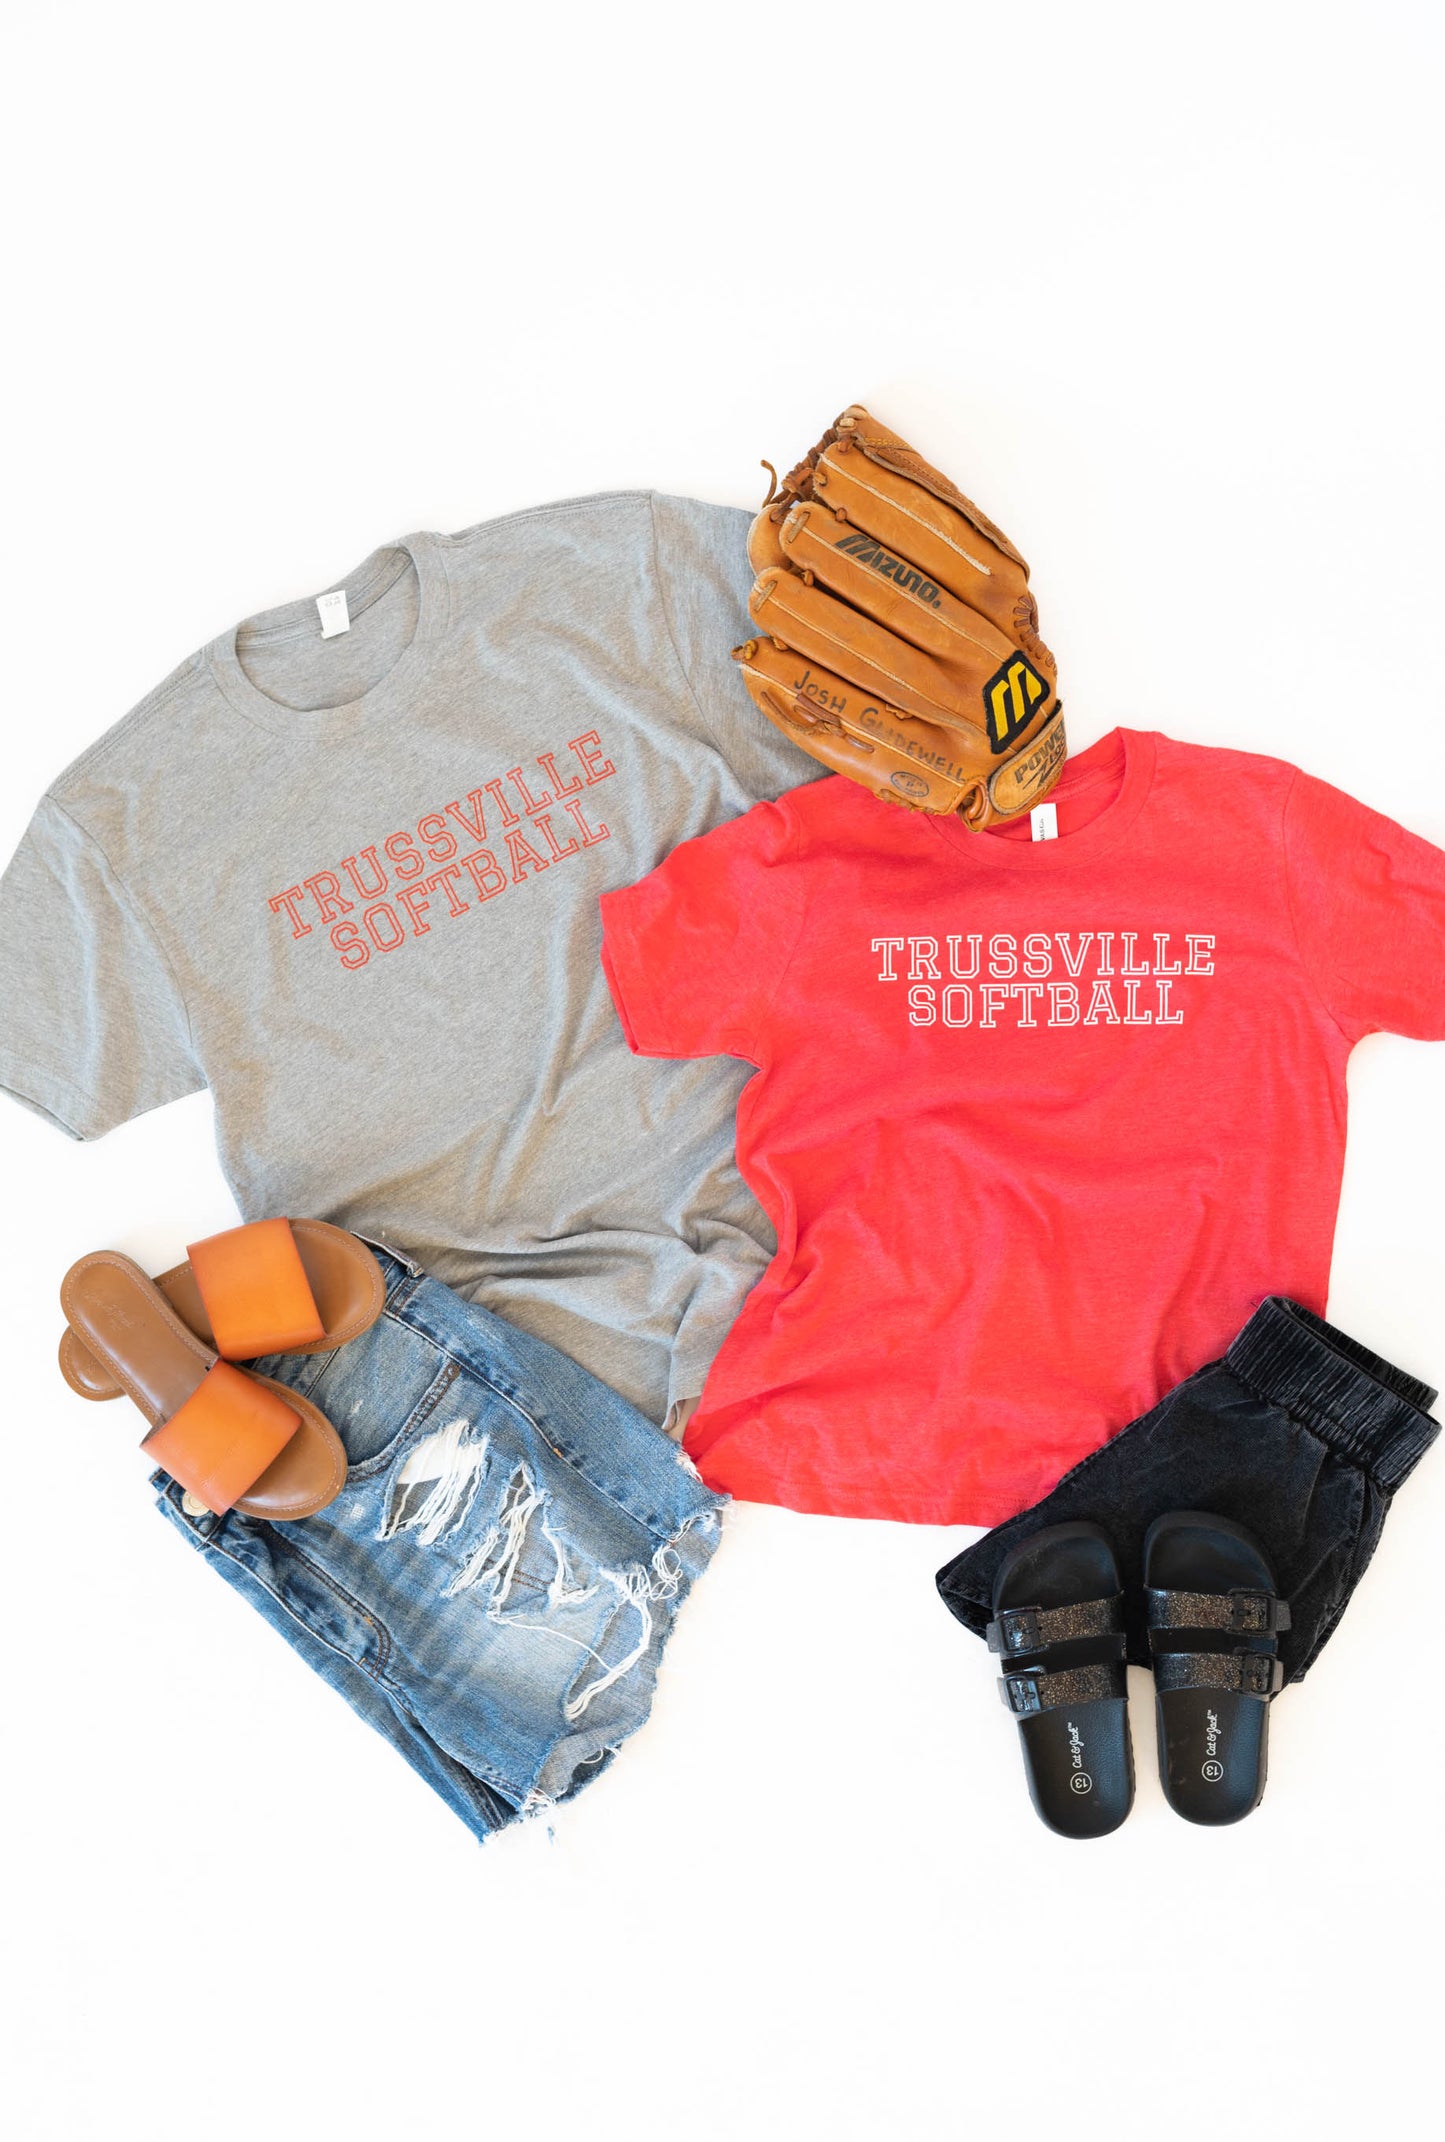 Trussville Softball | Kids Tee | RTS-Kids Tees-Sister Shirts-Sister Shirts, Cute & Custom Tees for Mama & Littles in Trussville, Alabama.